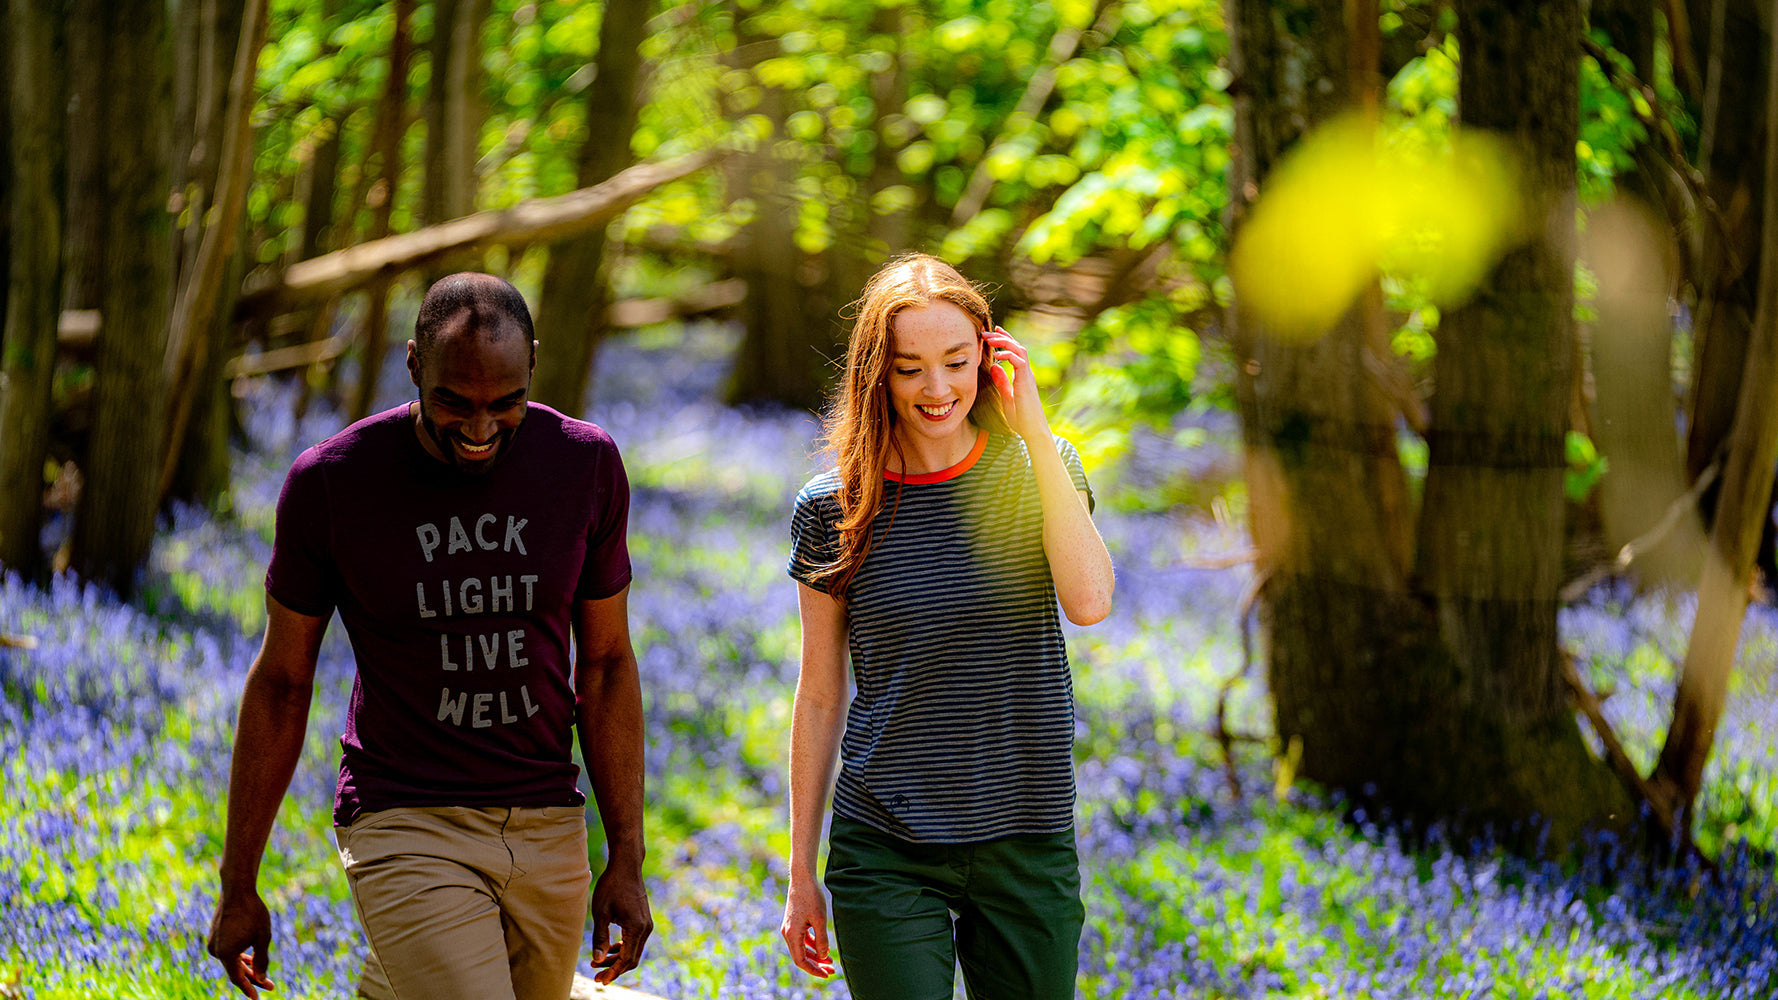 Isobaa Pack Light Tee and Roll Sleeve Tee in Summer forest with bluebells on the ground 